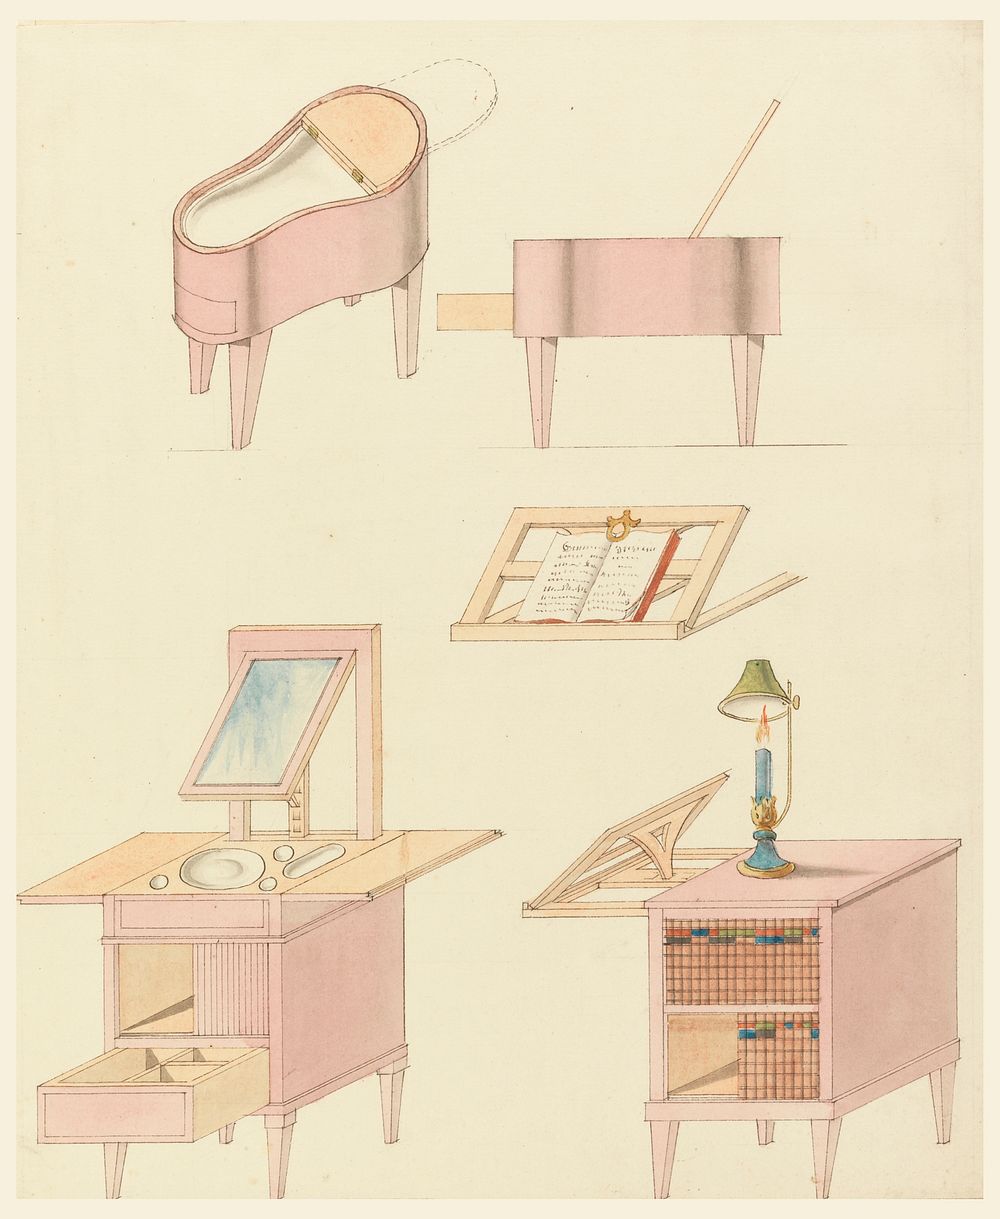 Designs for Mechanical Furniture: Bidet and Reading Washstand